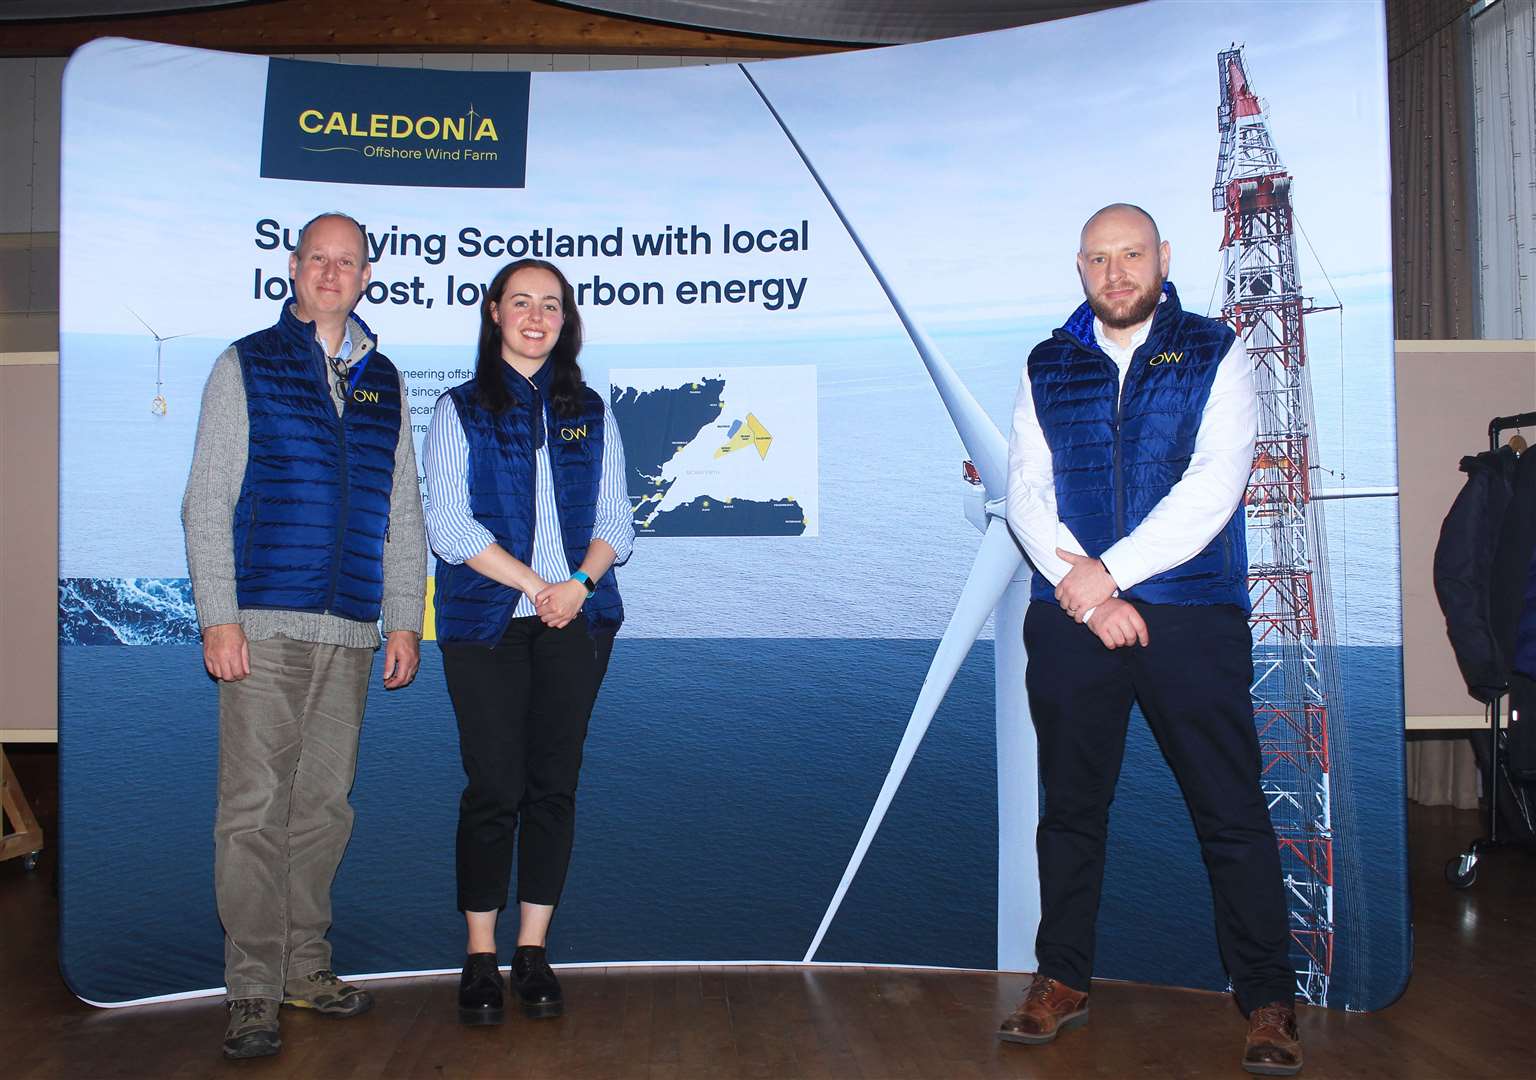 Ian Adams, Jennifer Stavert and Andrew Hamilton from the Caledonia offshore wind farm team at the public consultation event in Wick in November. Picture: Alan Hendry